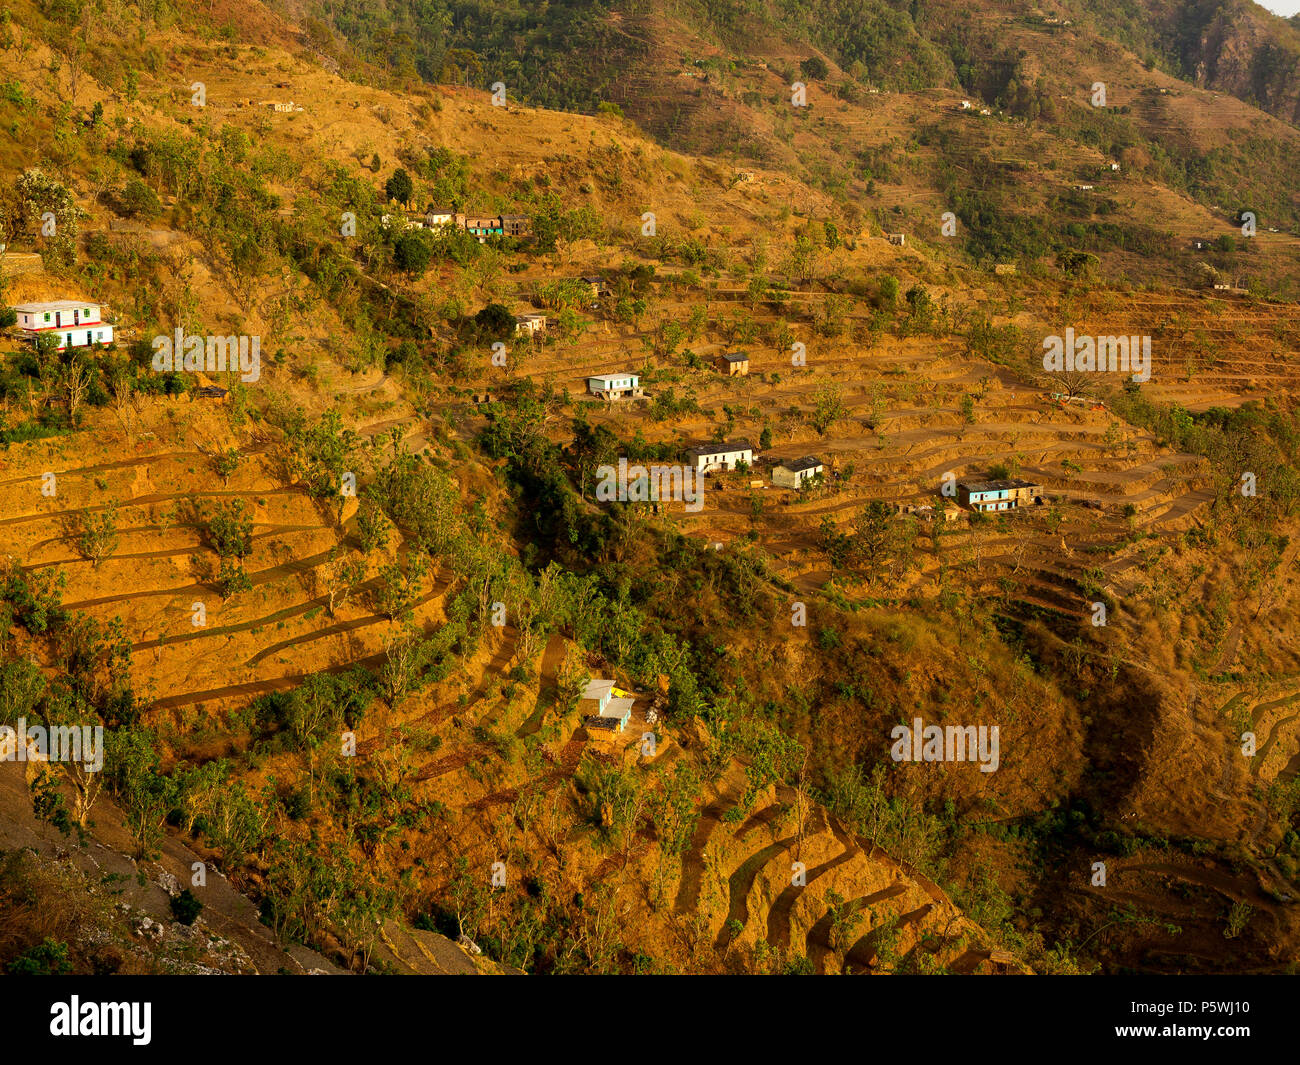 Terraced fields at a remote village on the Nandhour Valley, Kumaon Hills, Uttarakhand, India Stock Photo